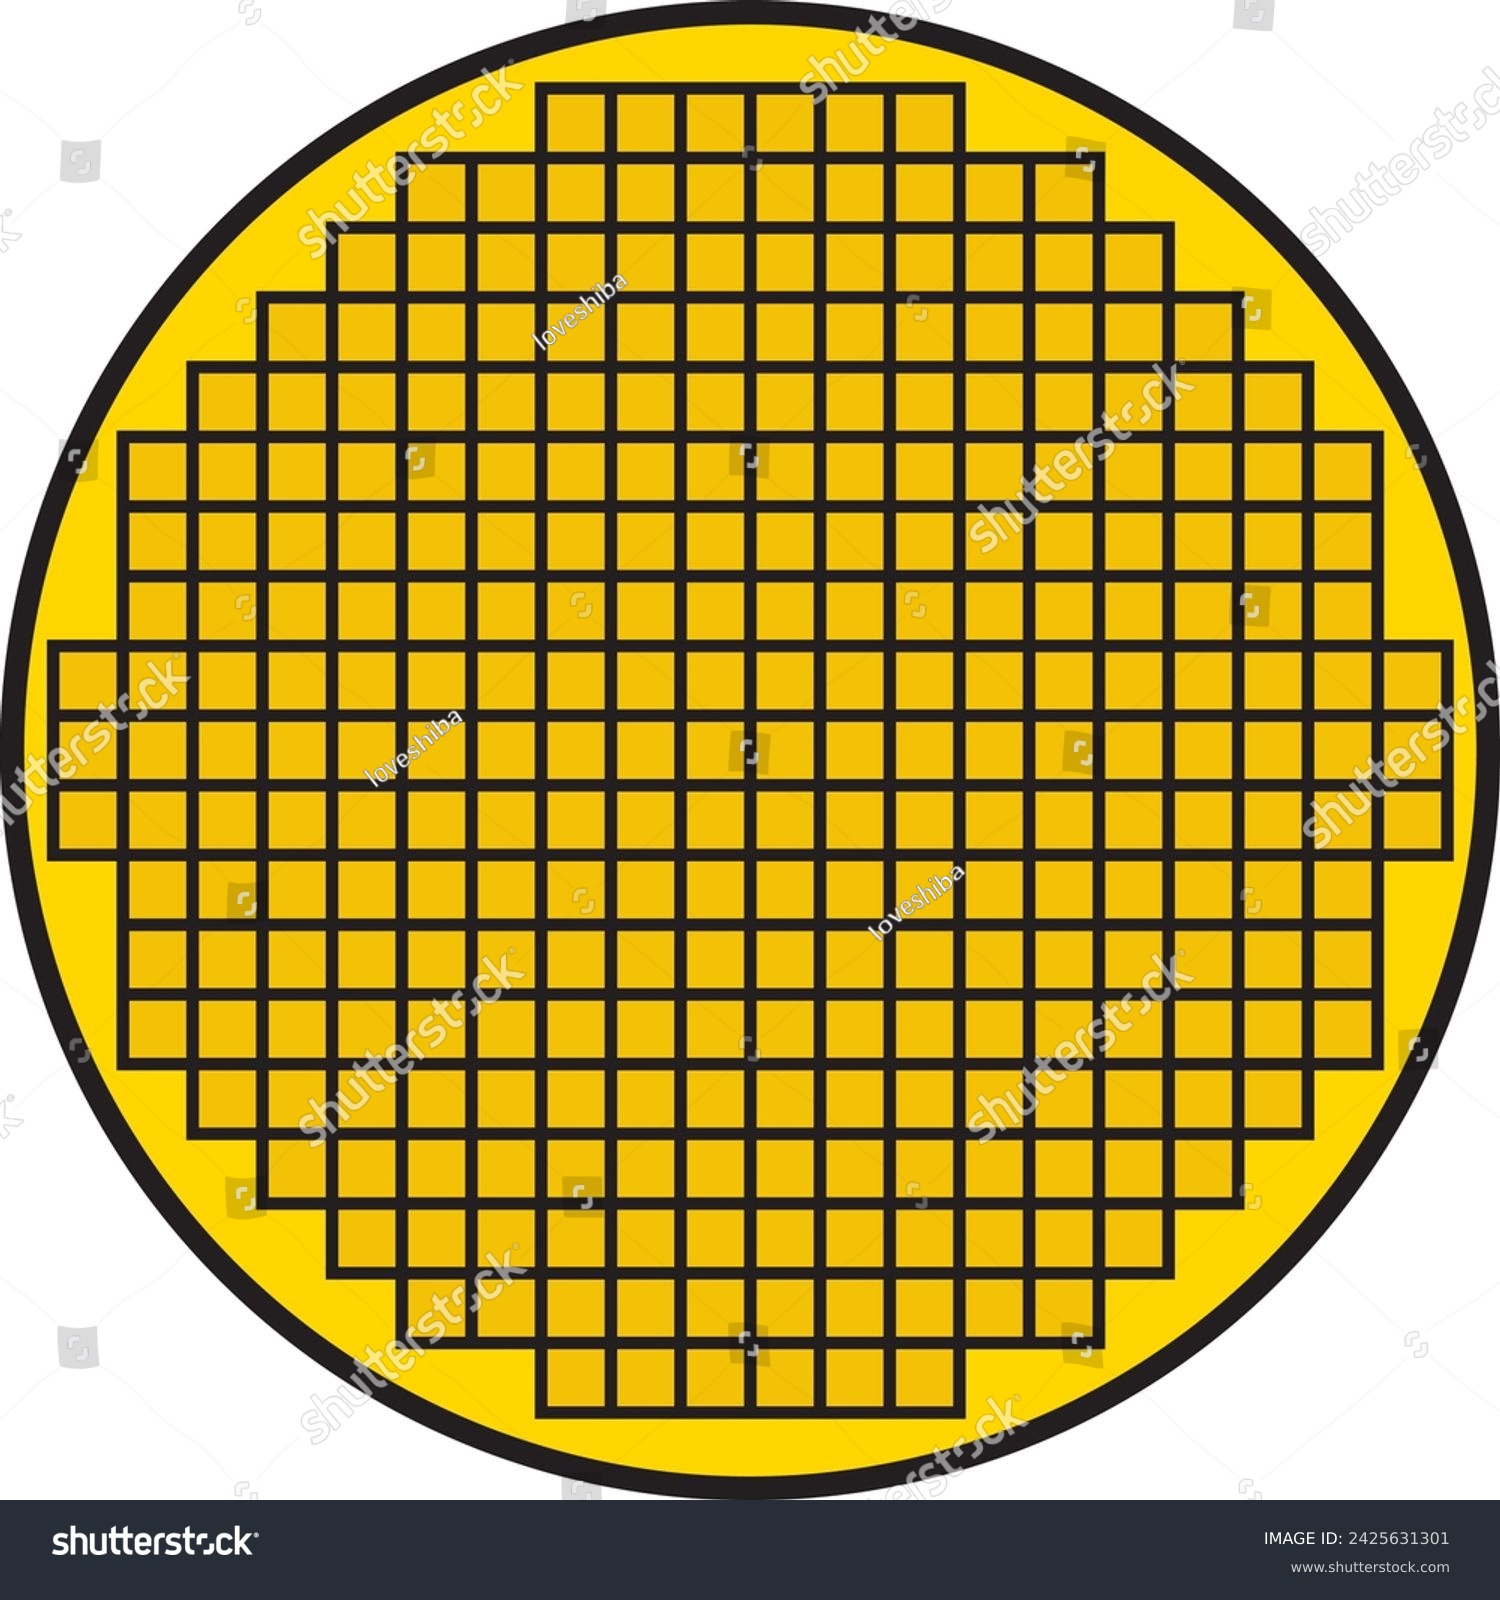 SVG of Illustration of a golden silicon wafer seen from the front svg